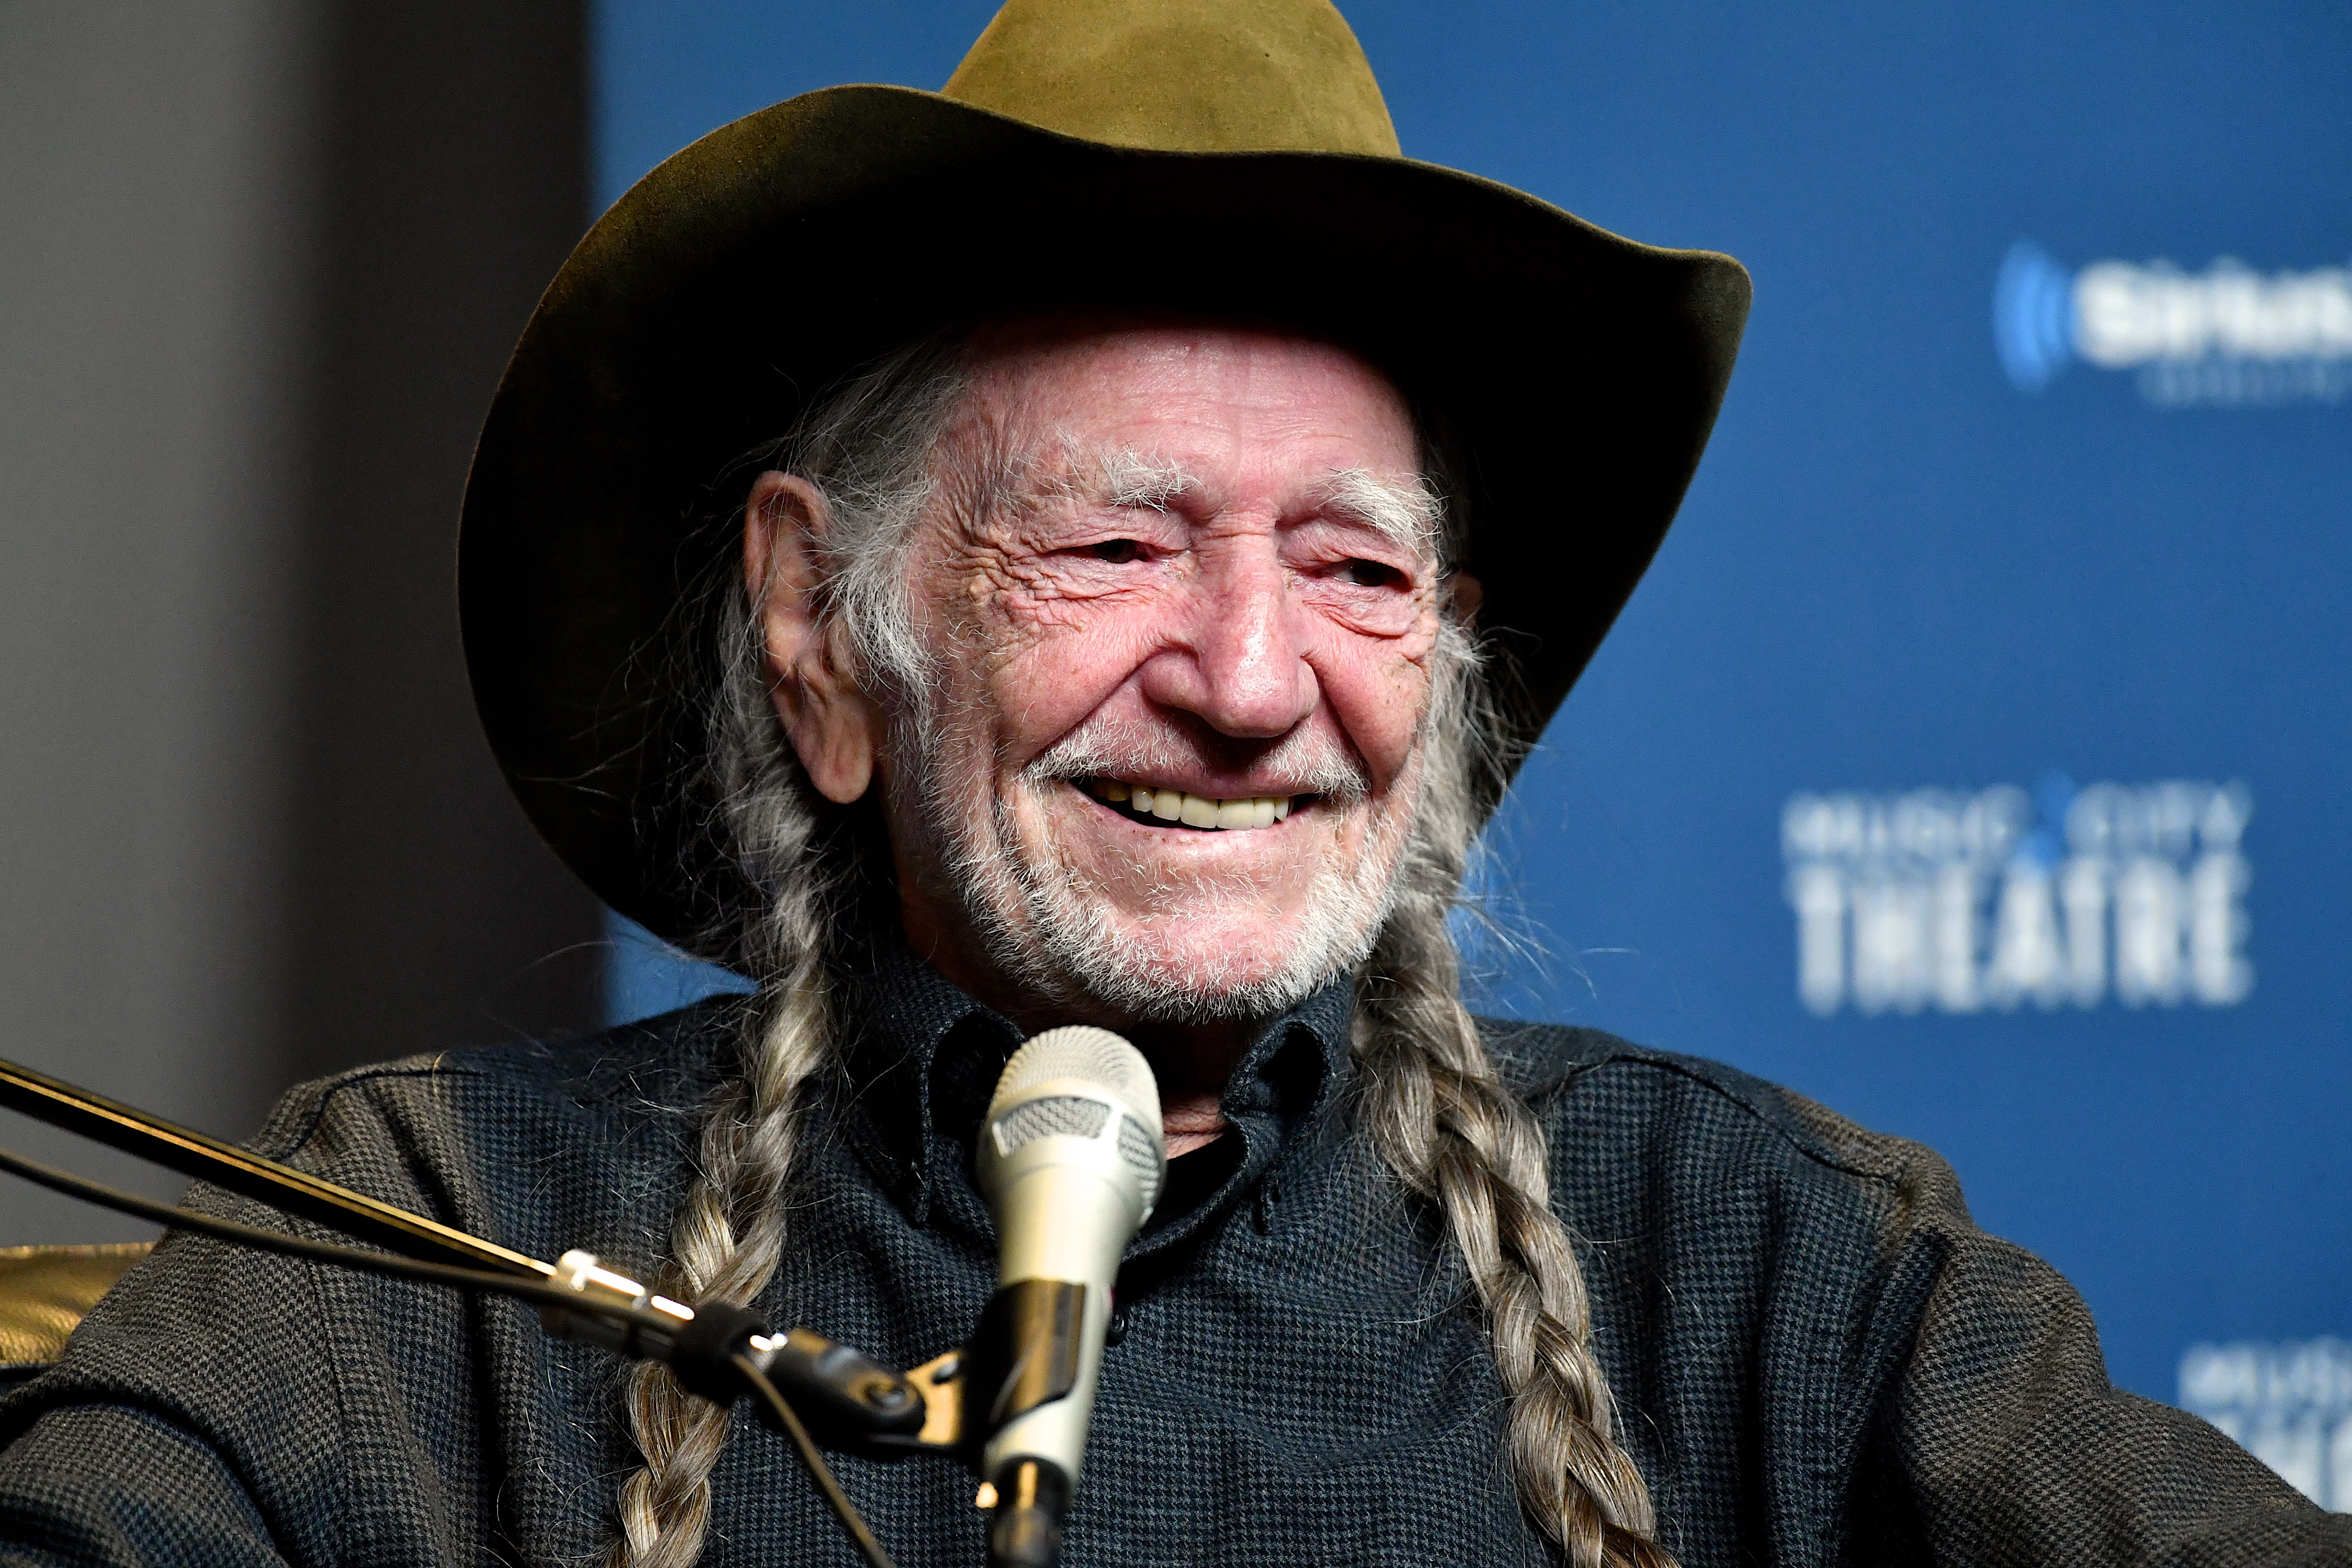 Willie Nelson speaks onstage at his album premiere on April 4, 2017, in Nashville, Tennessee. | Source: Getty Images